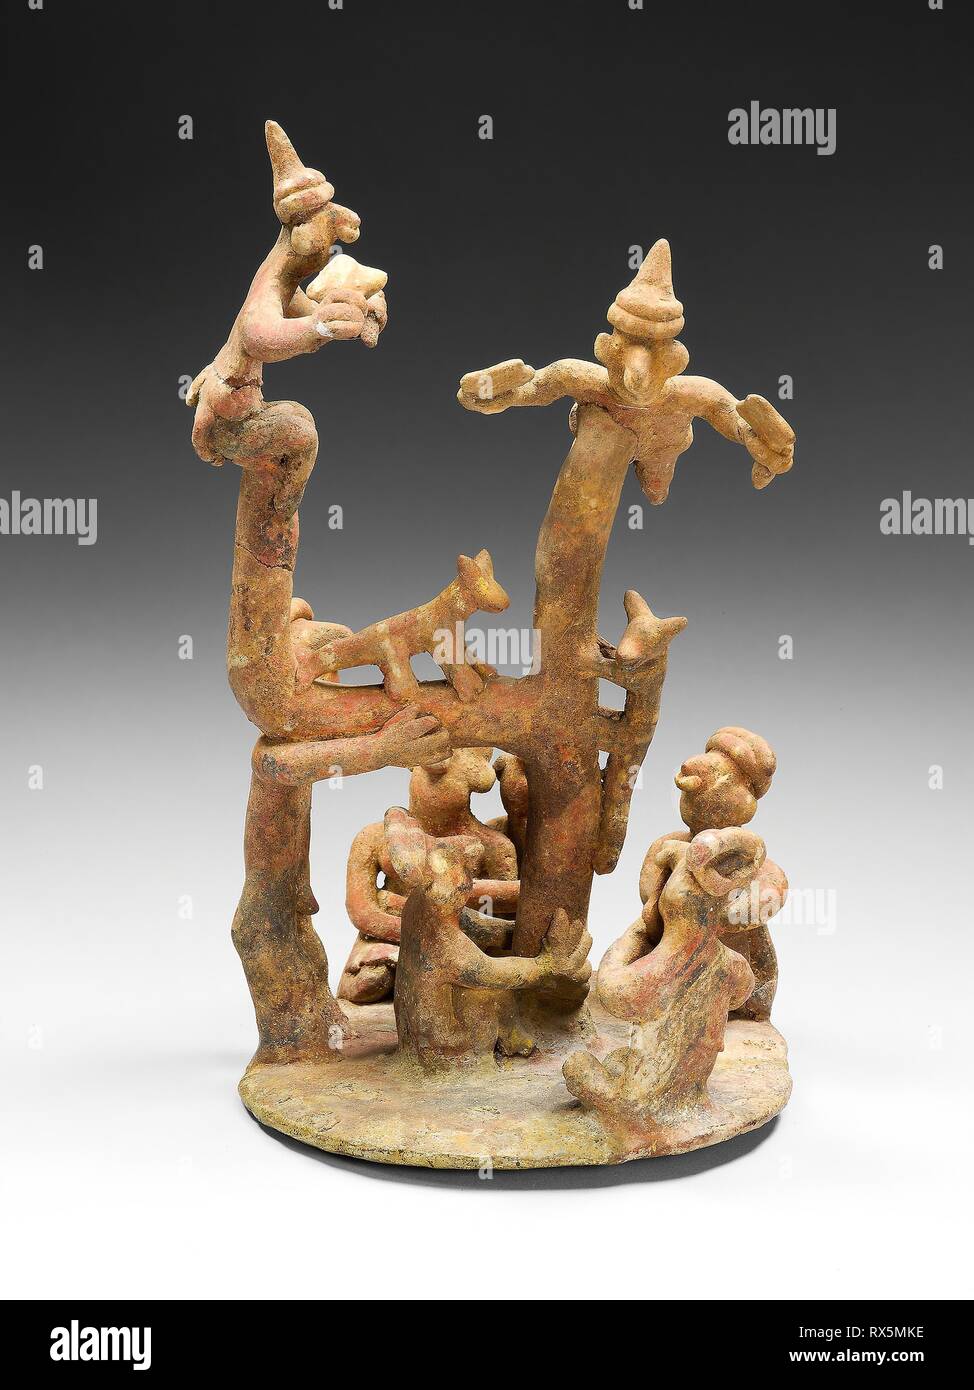 Model of a Tree-Climbing Ritual. Nayarit; Ixtlán del Río, Nayarit, Mexico. Date: 100 AD-800 AD. Dimensions: H. 22.8 cm (9 in.). Ceramic and pigment. Origin: Nayarit state. Museum: The Chicago Art Institute. Stock Photo